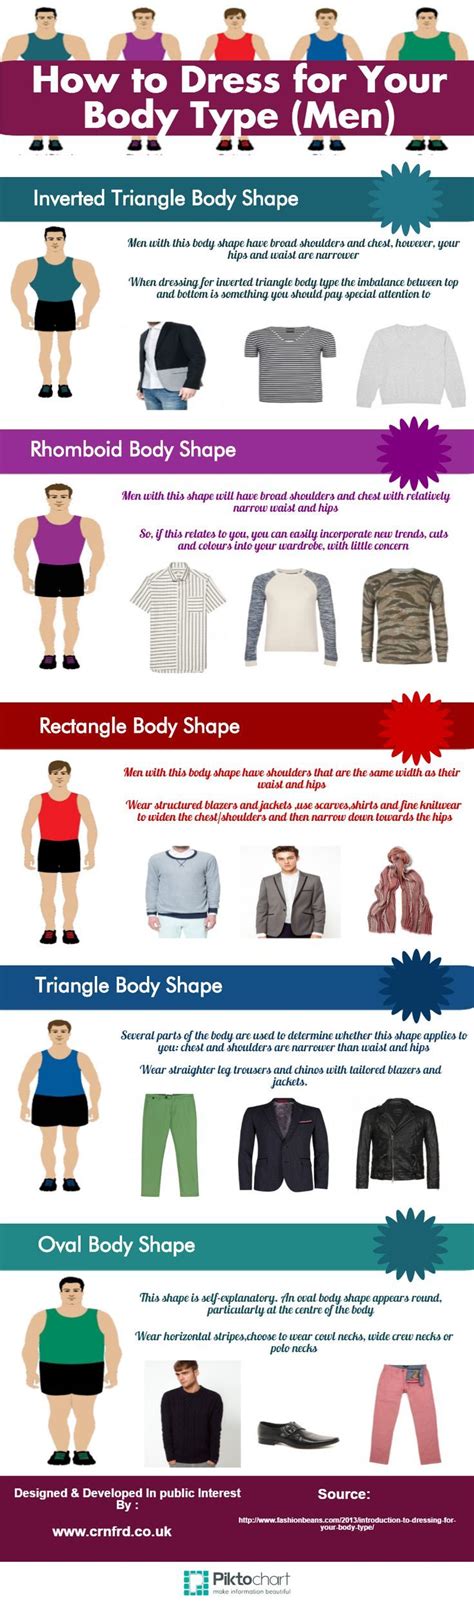 How To Dress For Your Body Type Men Body Types Dressing Your Body Type Big Men Fashion